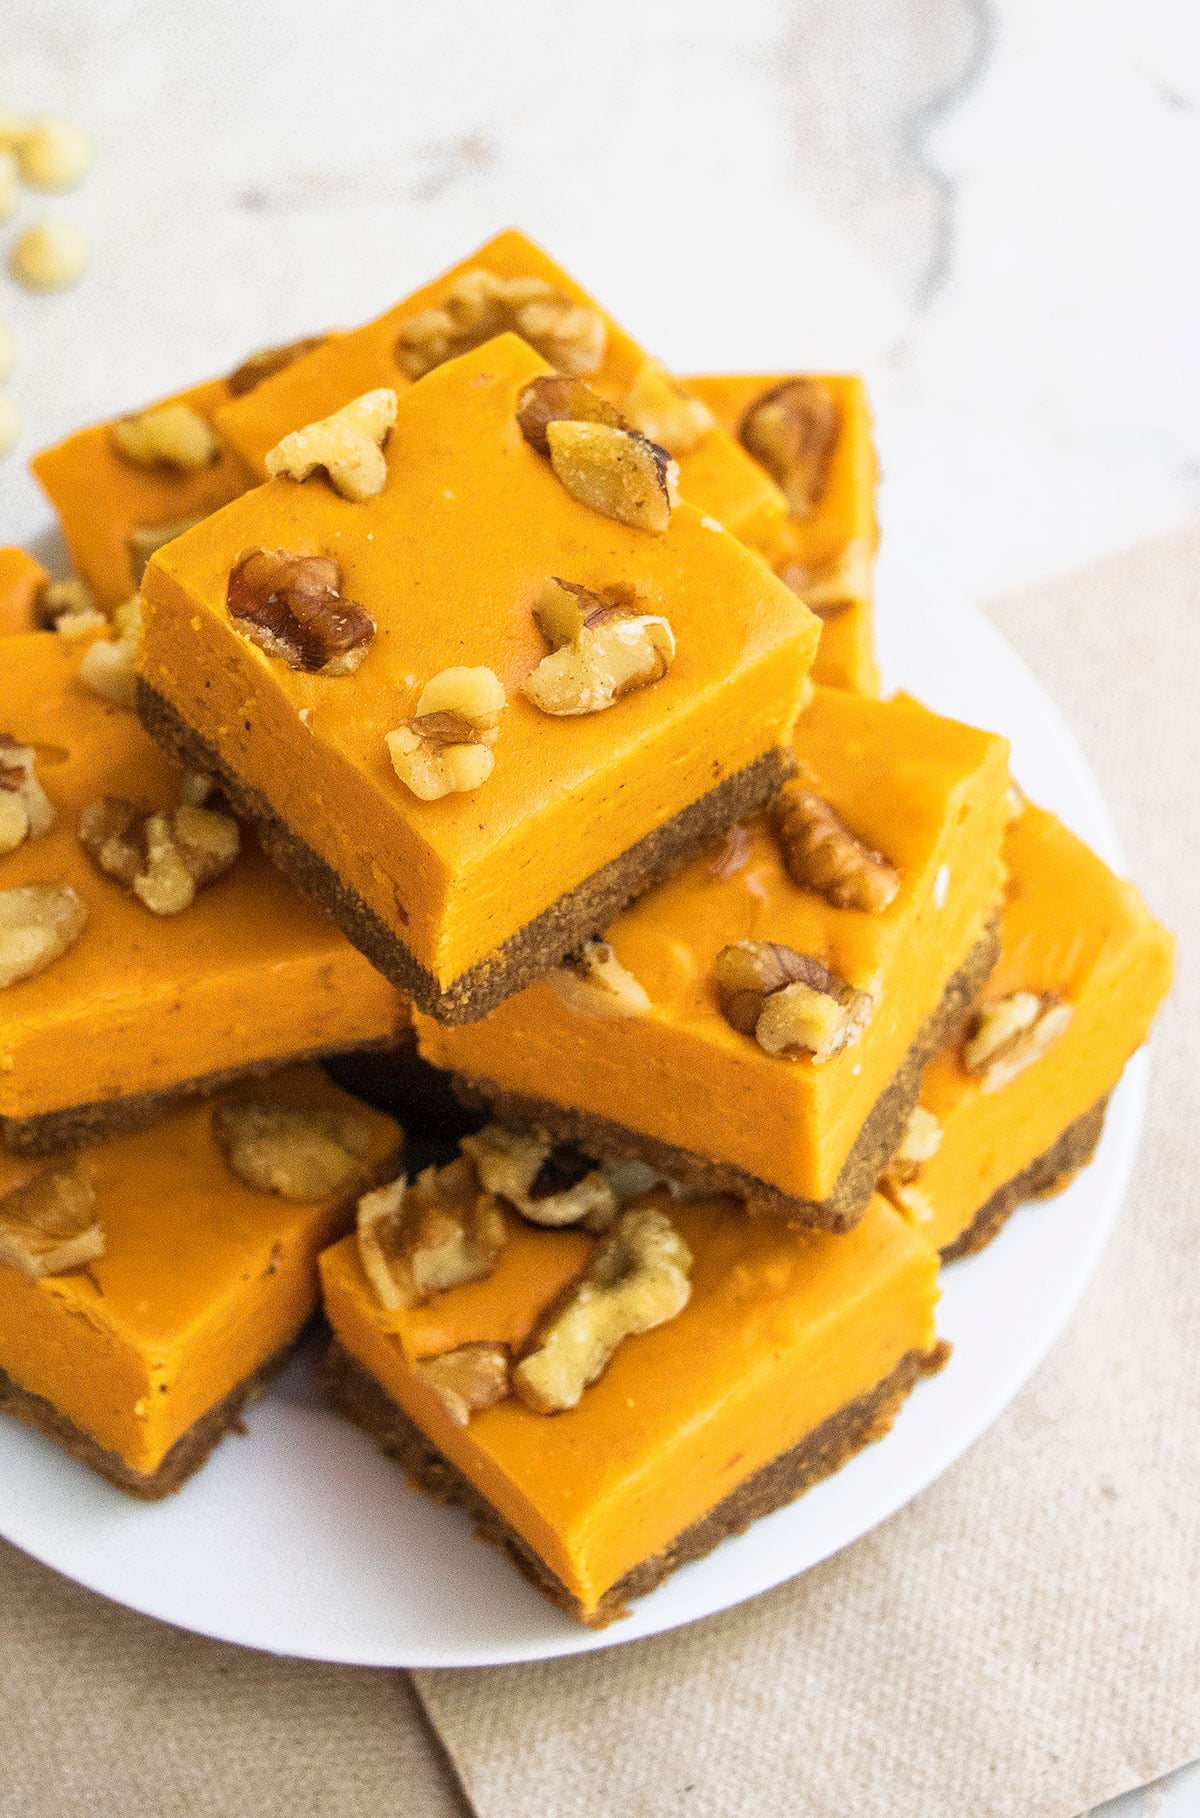 Slices of Microwave Fudge With White Chocolate and Pumpkin Puree on White Dish.